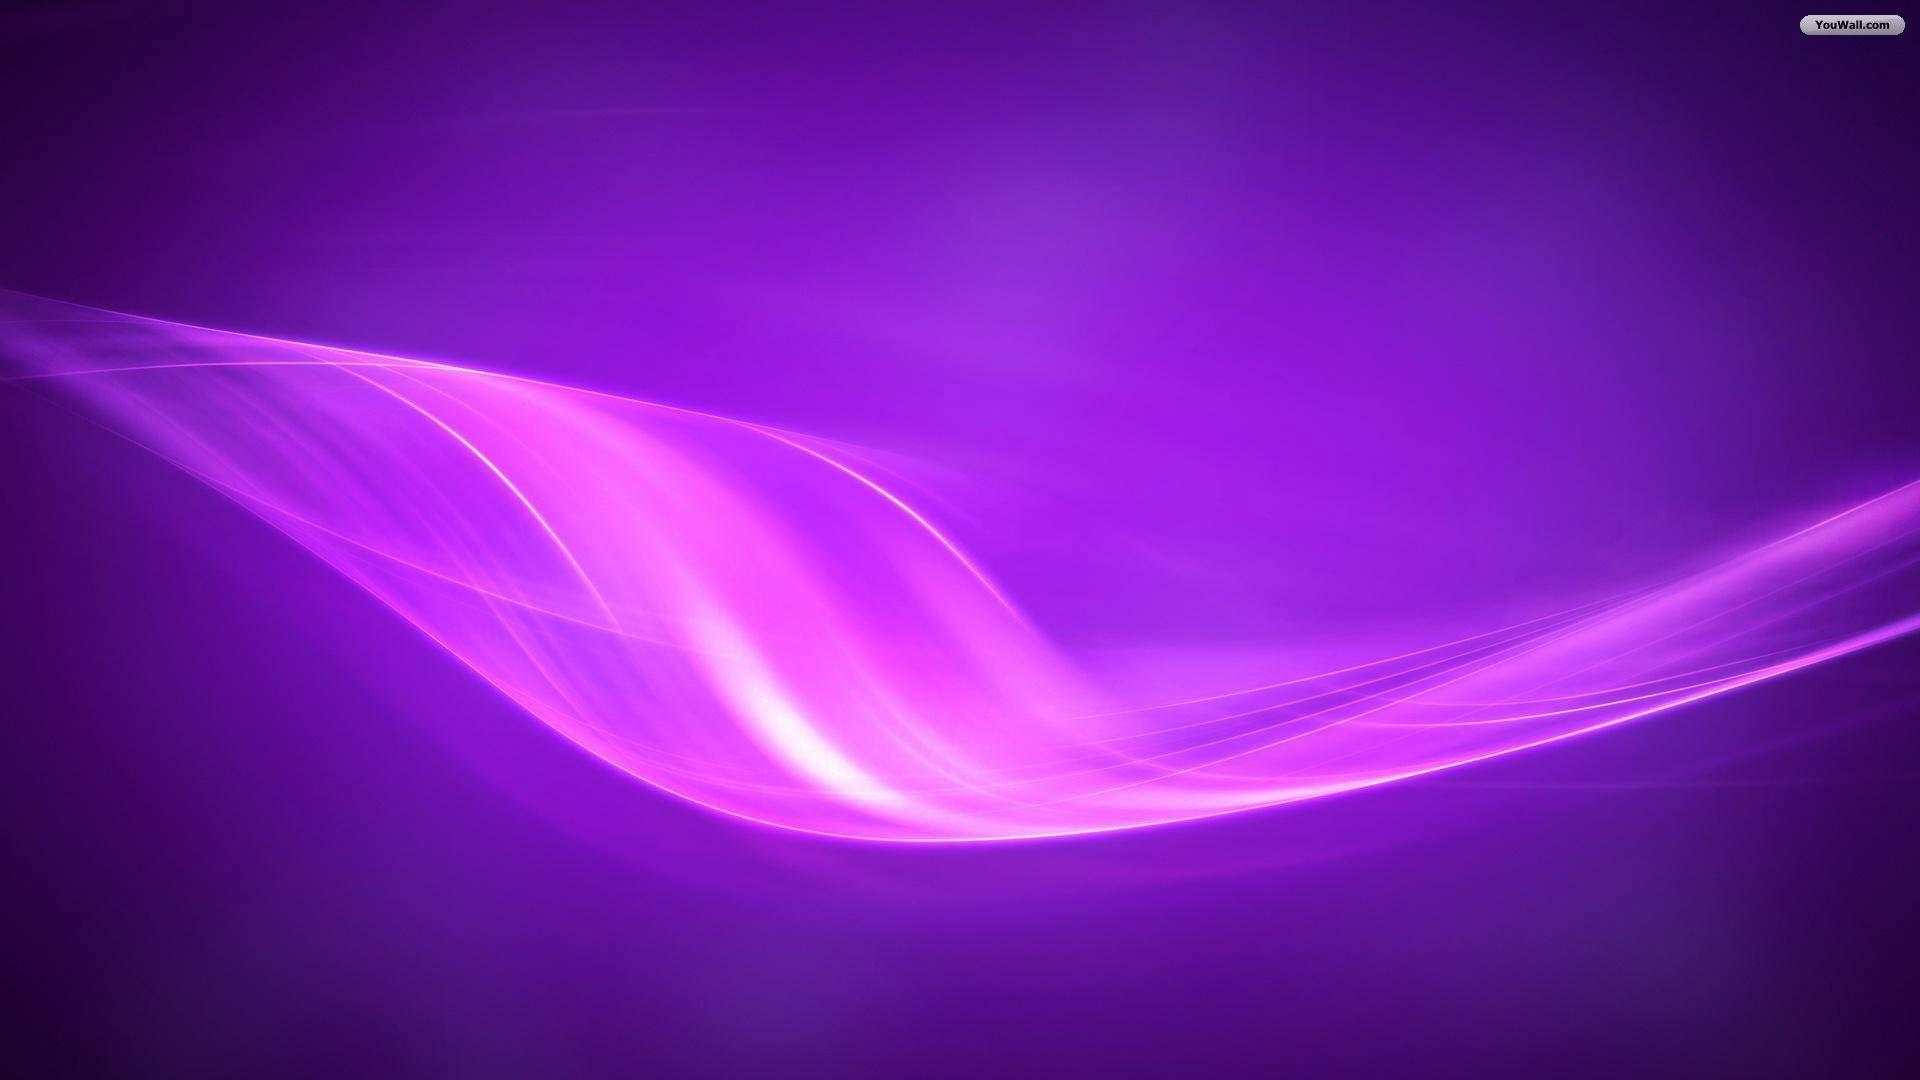 Violet Abstract Wallpapers - Top Free Violet Abstract Backgrounds